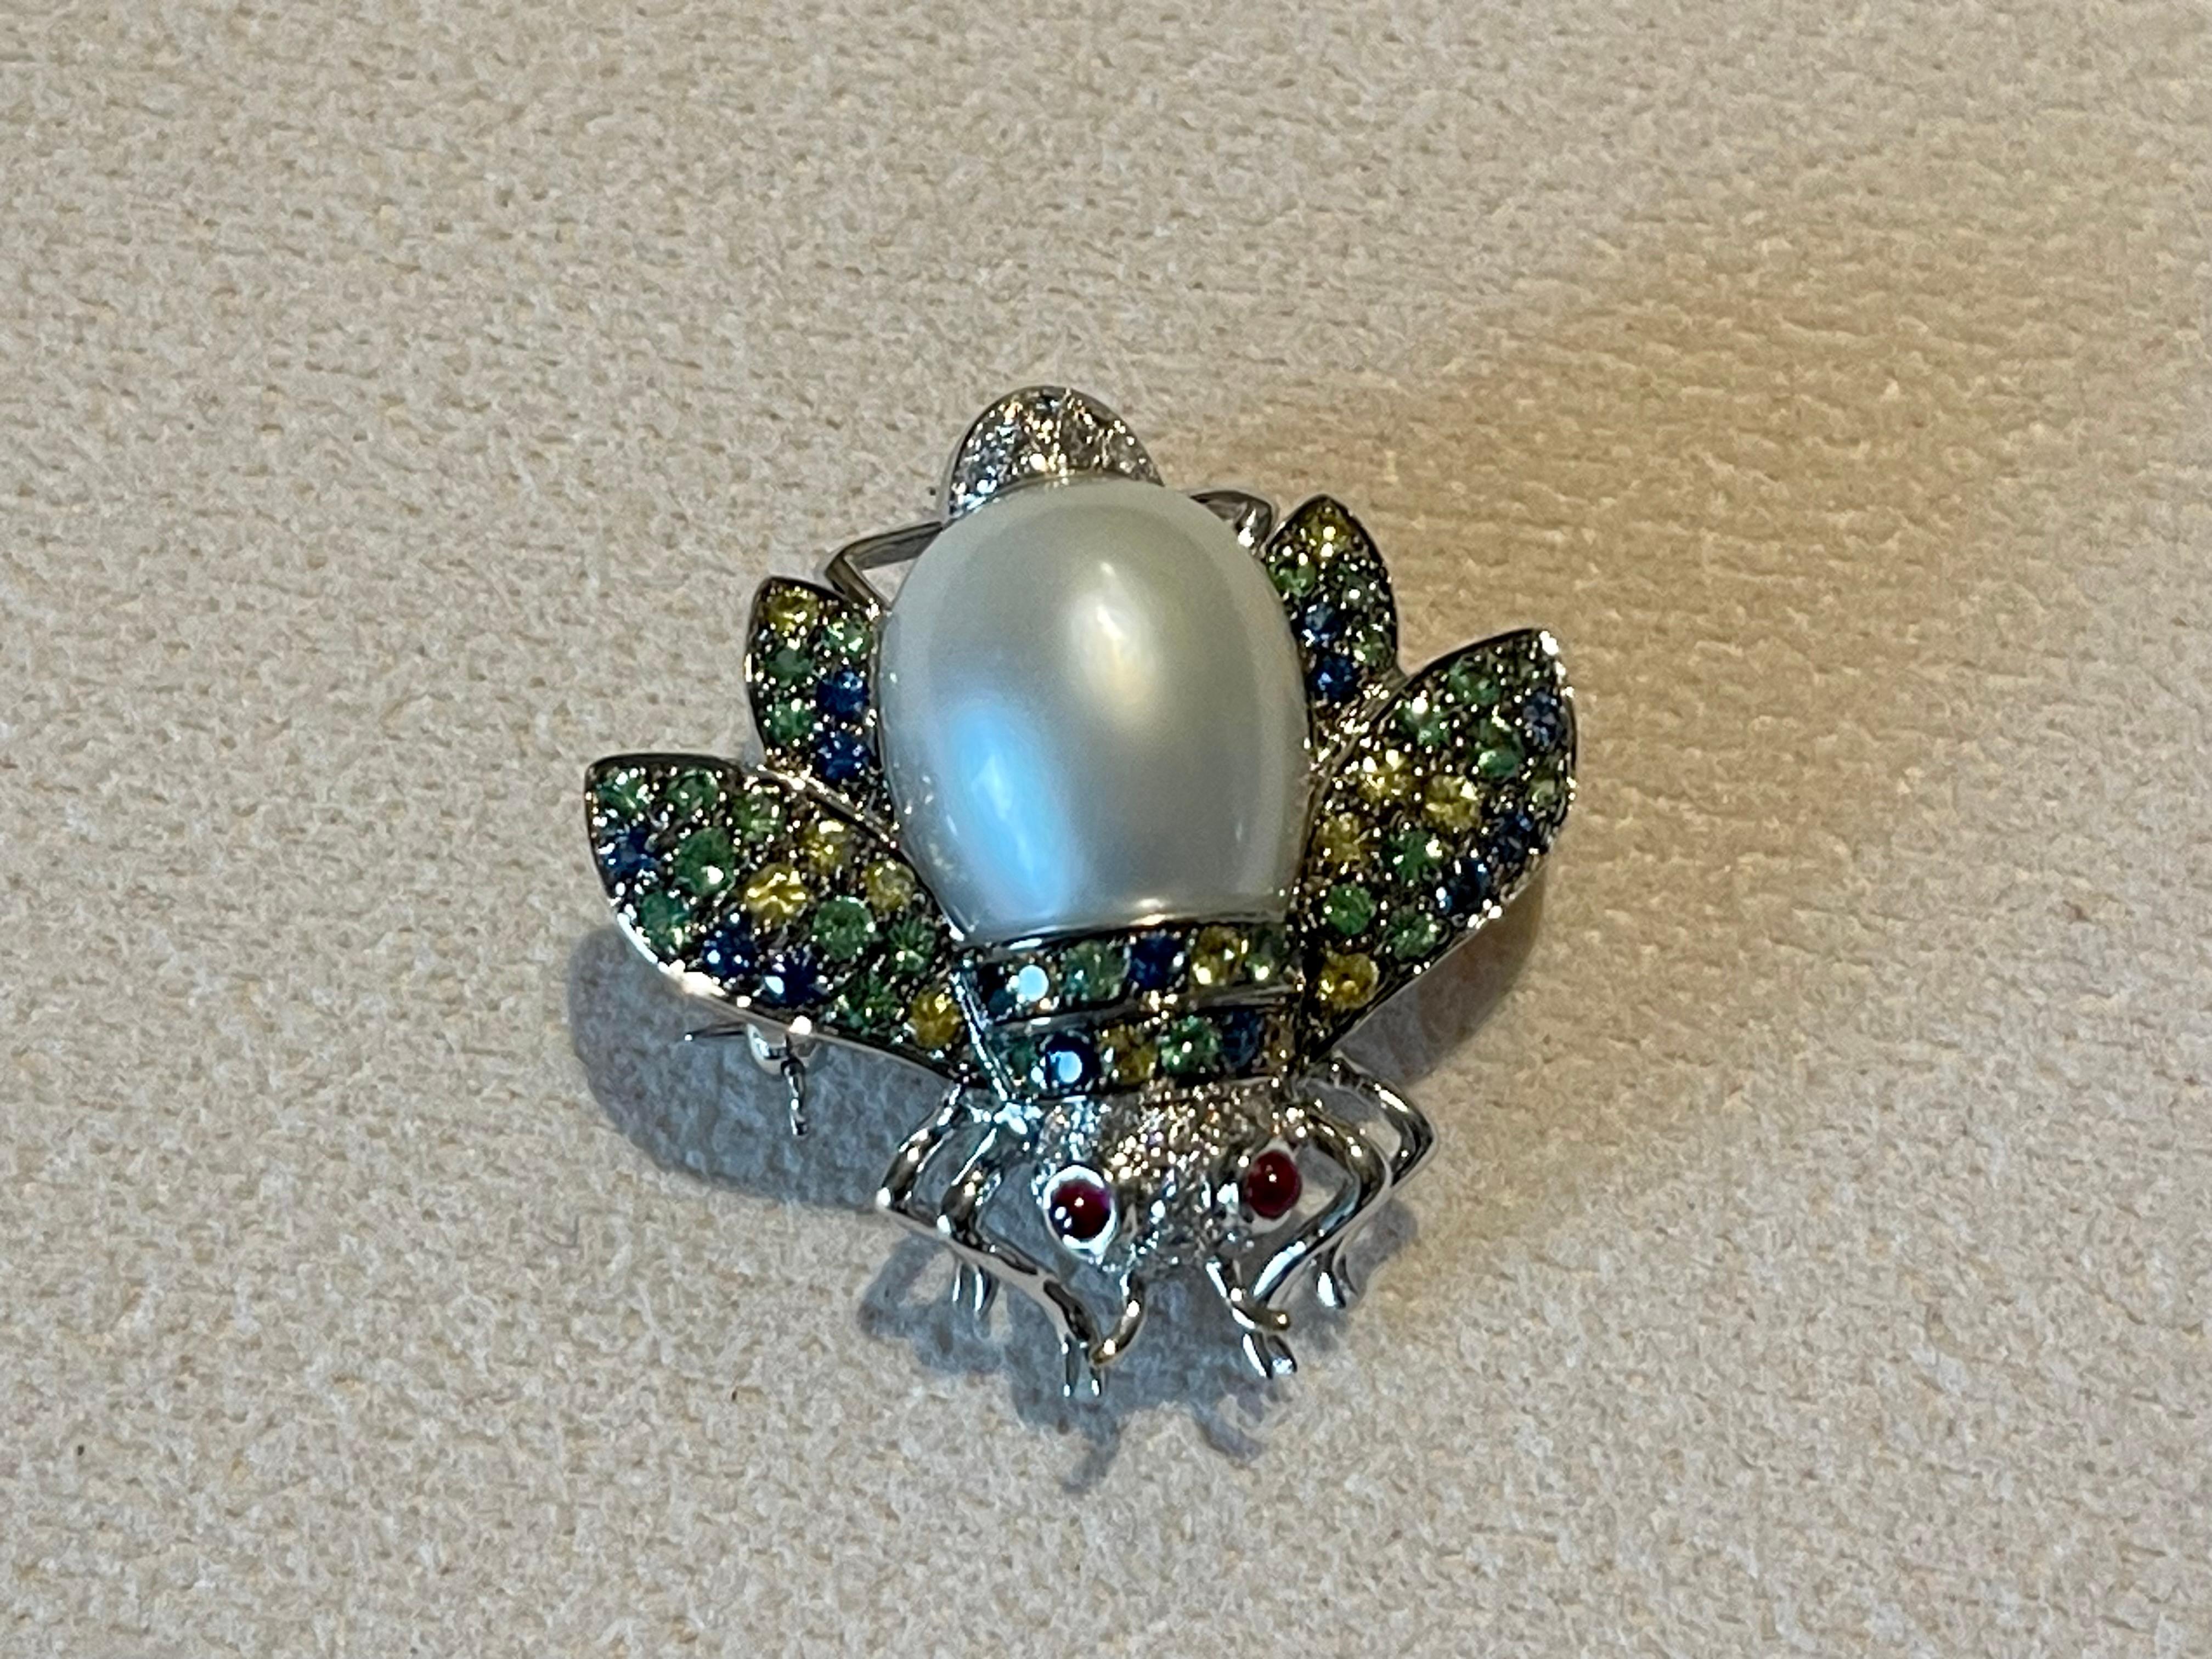 For all bee lovers- you are staring at a exquisite pin brooch!
Beautiful Bumble Bee brooch, set with 23 white brilliant cut Diamonds weighing 0.0.26 ct , G color, vs clarity, 2 Ruby cabochons eyes weighing 0.15 ct,  15 blue Sapphires weighing 0.41